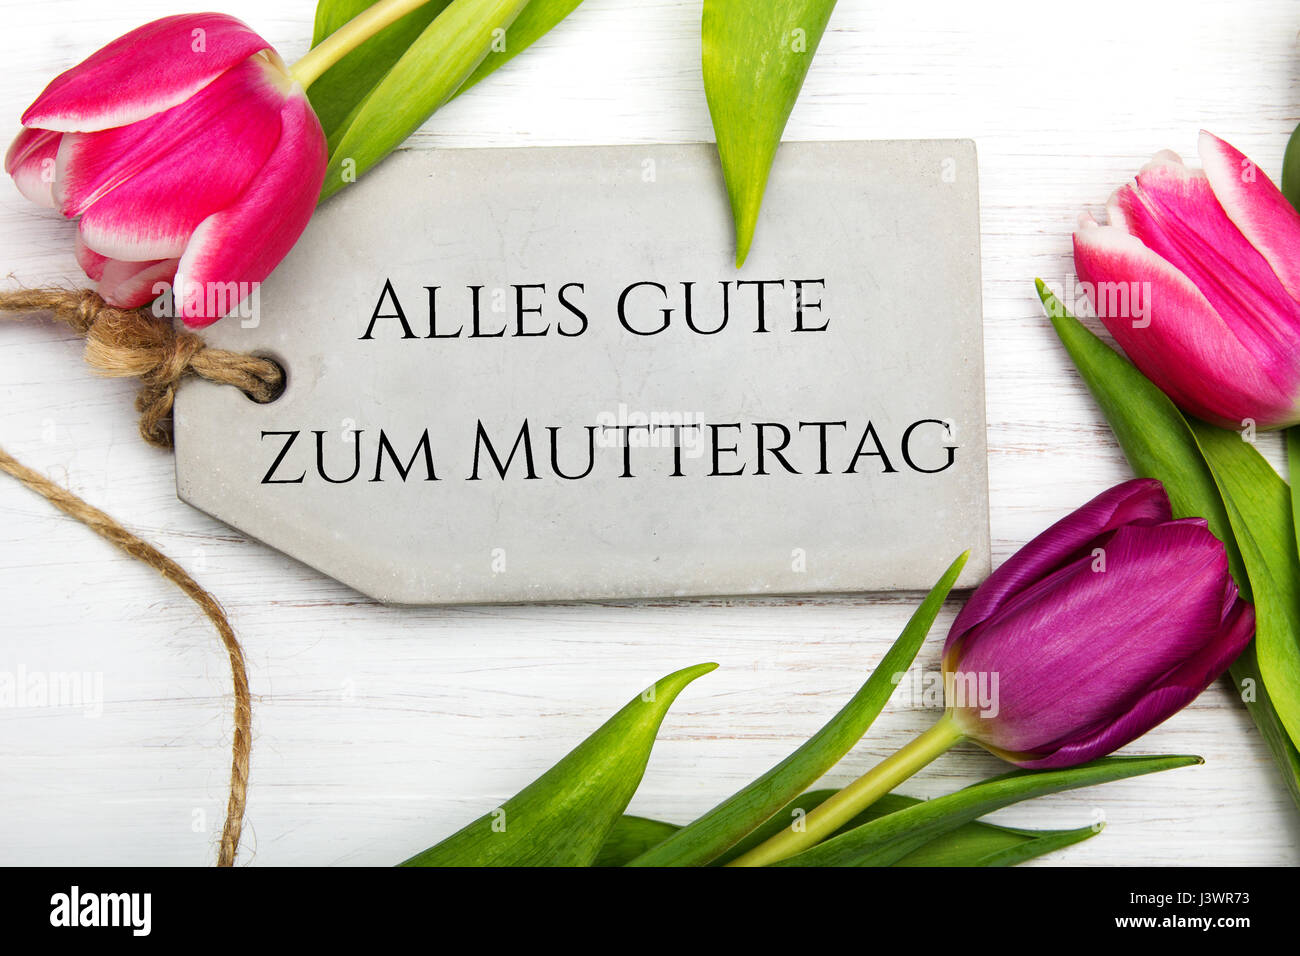 German Mother S Day Card With Word Muttertag Mother S Day Tulip And Stock Photo Alamy